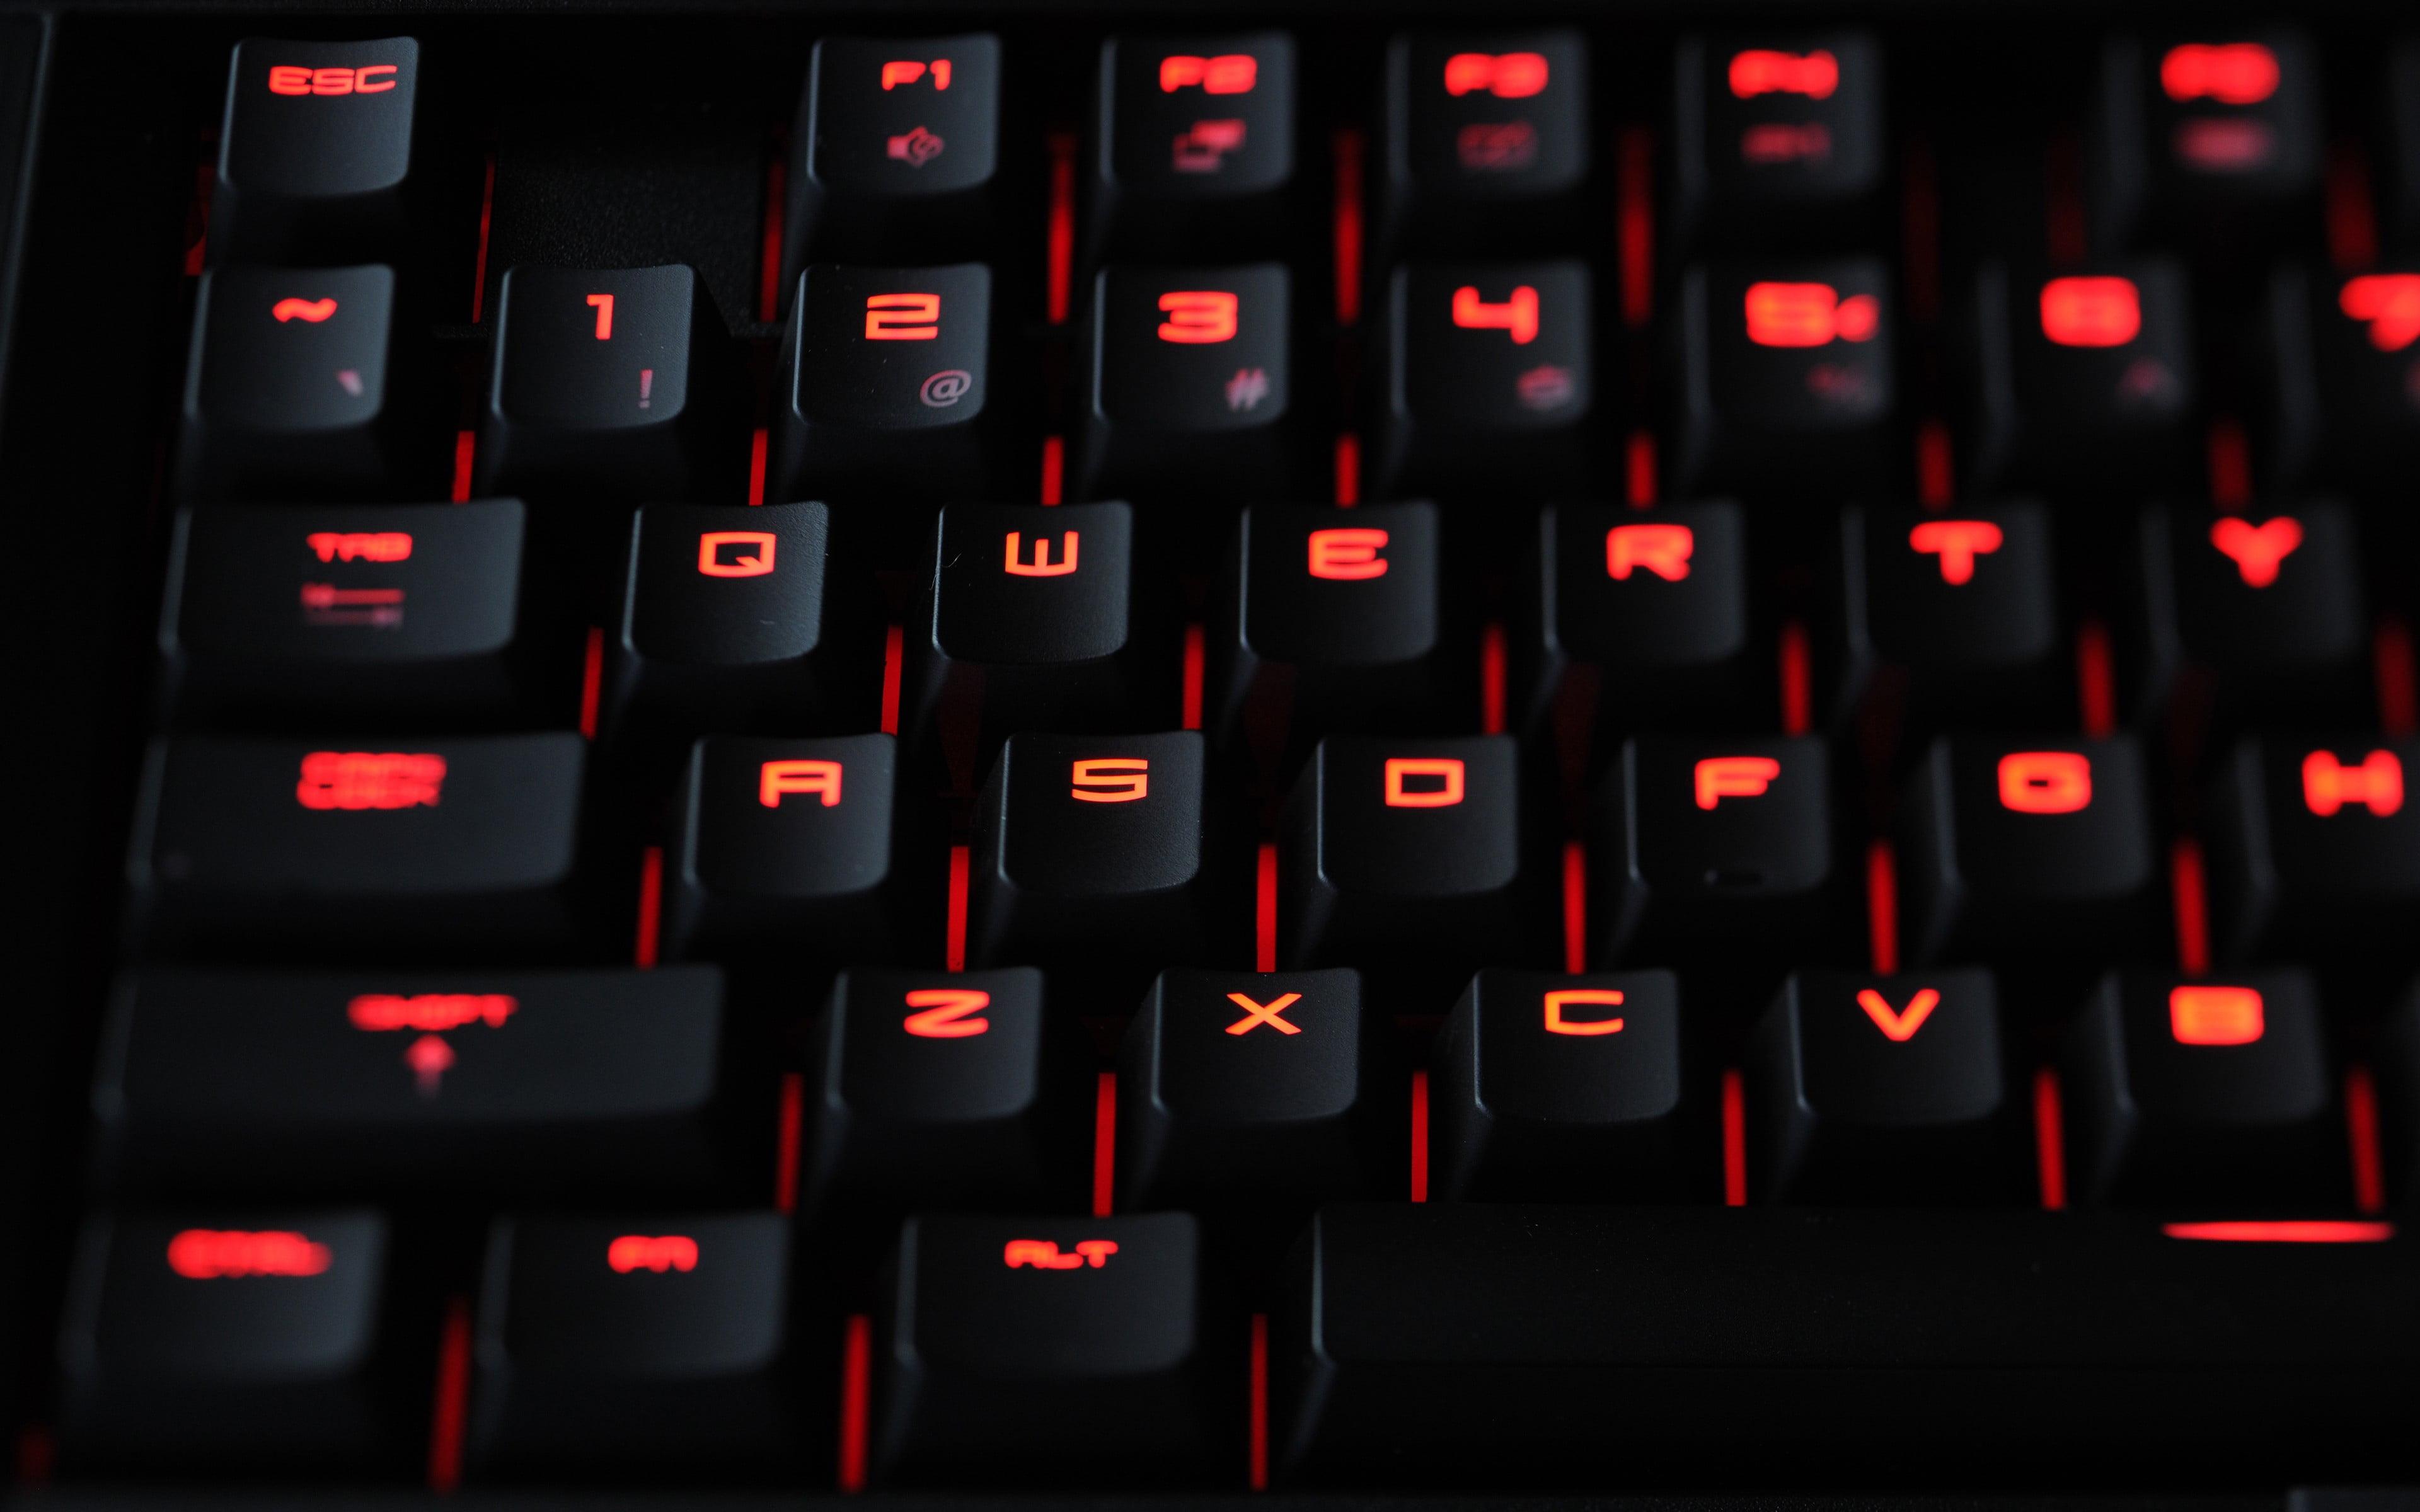 LED Keyboard Wallpapers - Wallpaper Cave